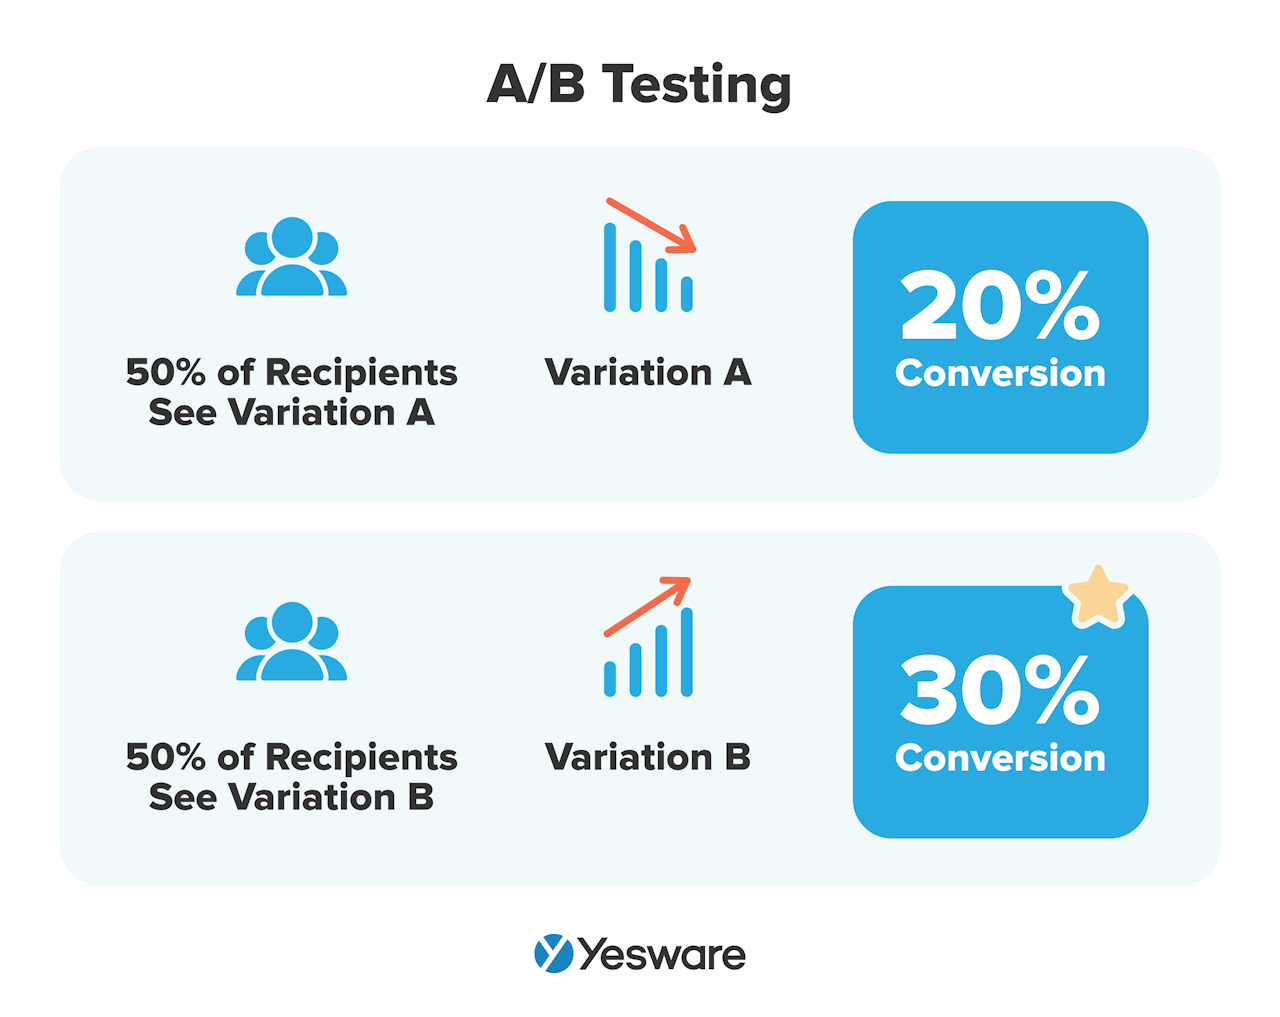 Sales pitch examples: A/B testing